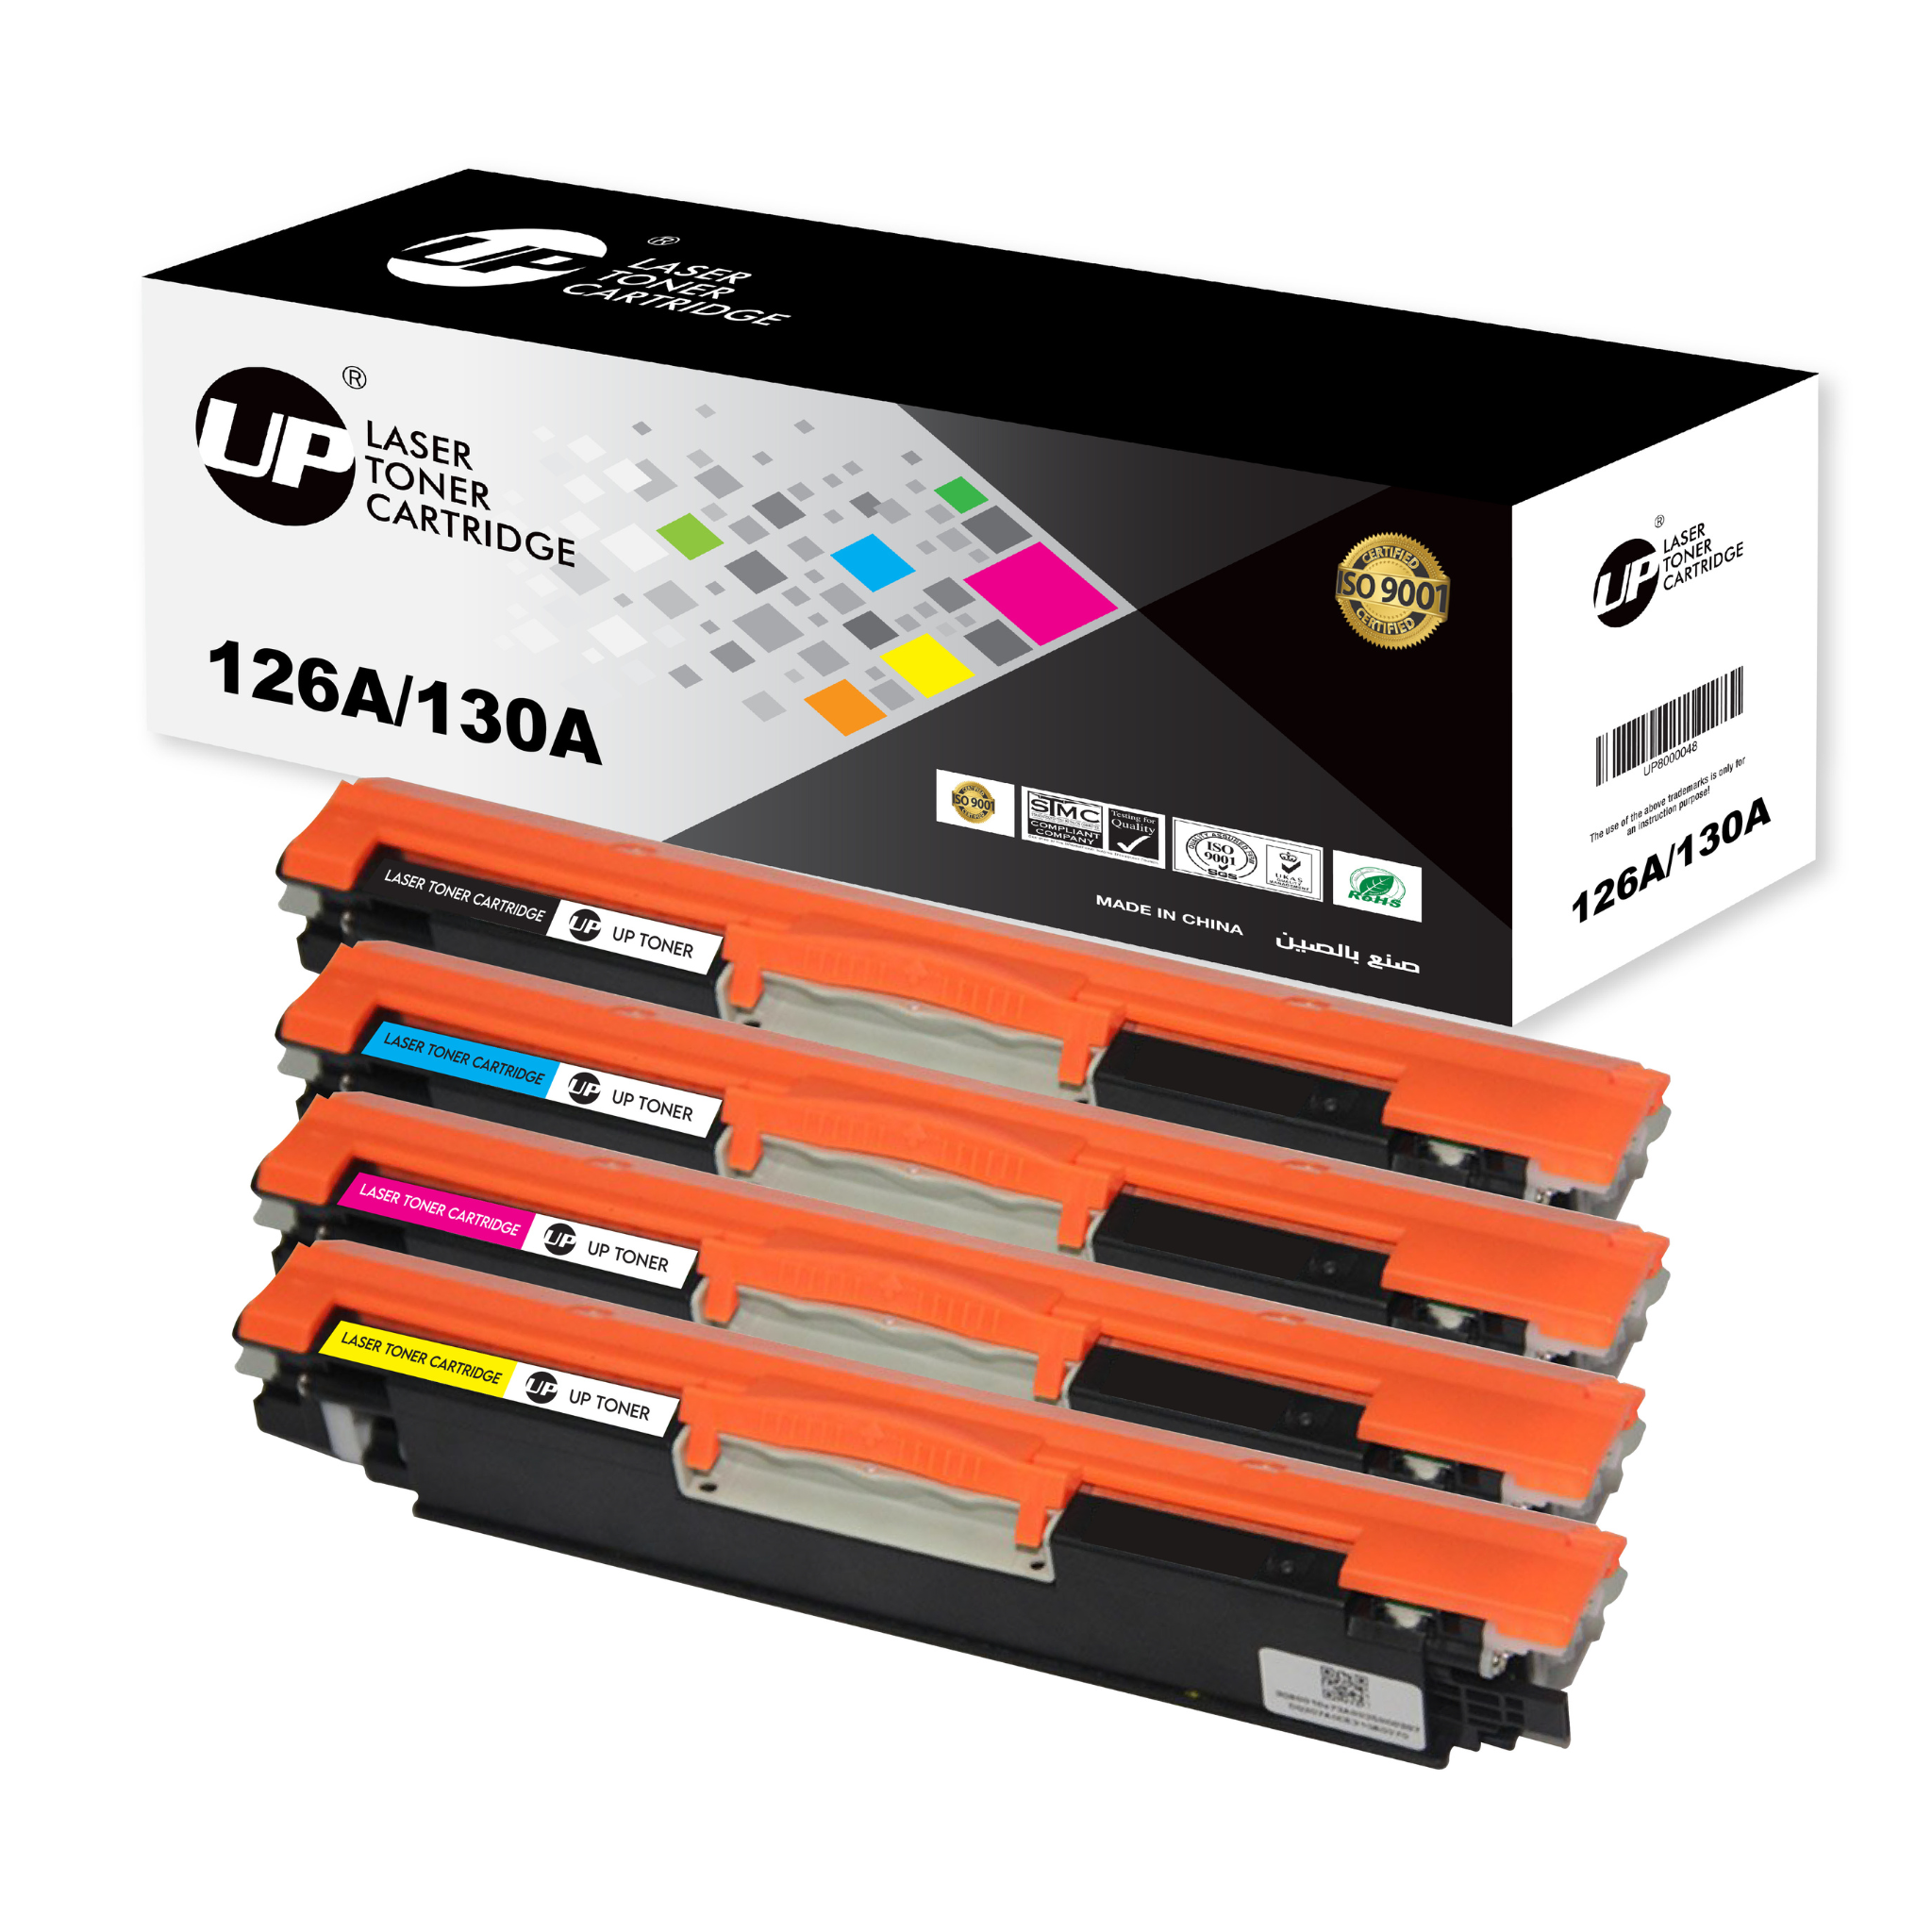 4 Pack UP CompatibleToner Cartridge 126A 130A Toner Cartridge Replacement for HP 130A (1 Black, 1 Cyan, 1 Magenta, 1 Yellow, 4 Pack)